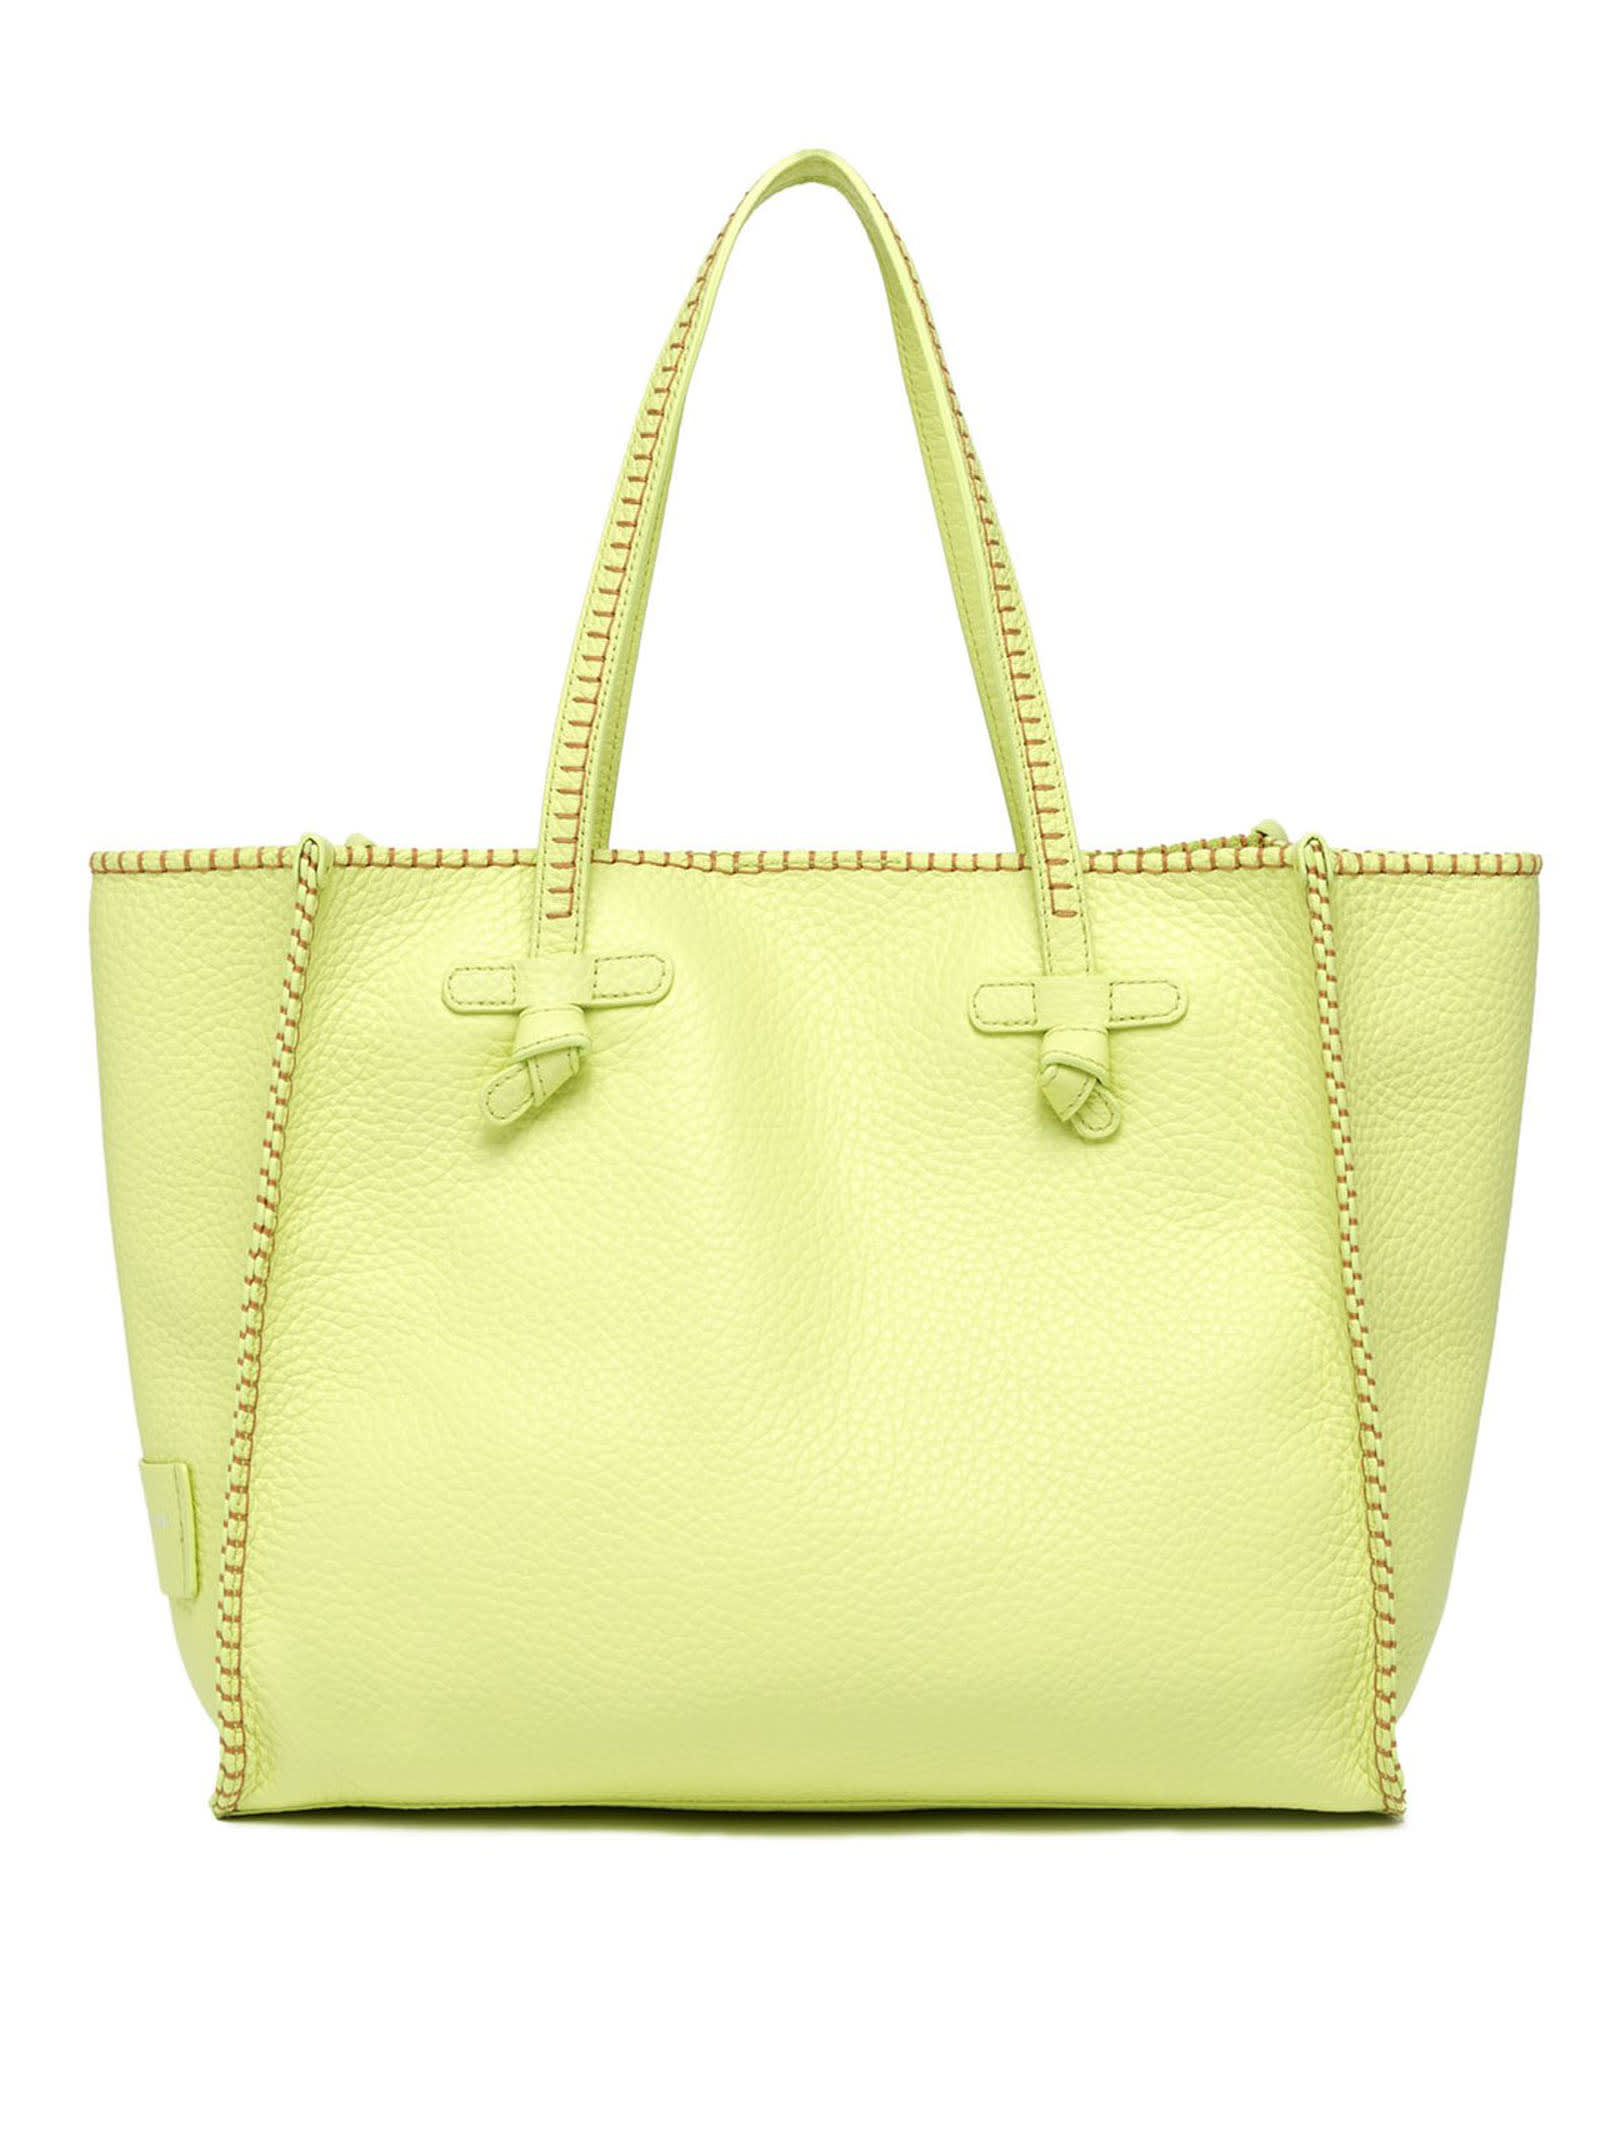 Yellow Soft Leather Shopping Bag